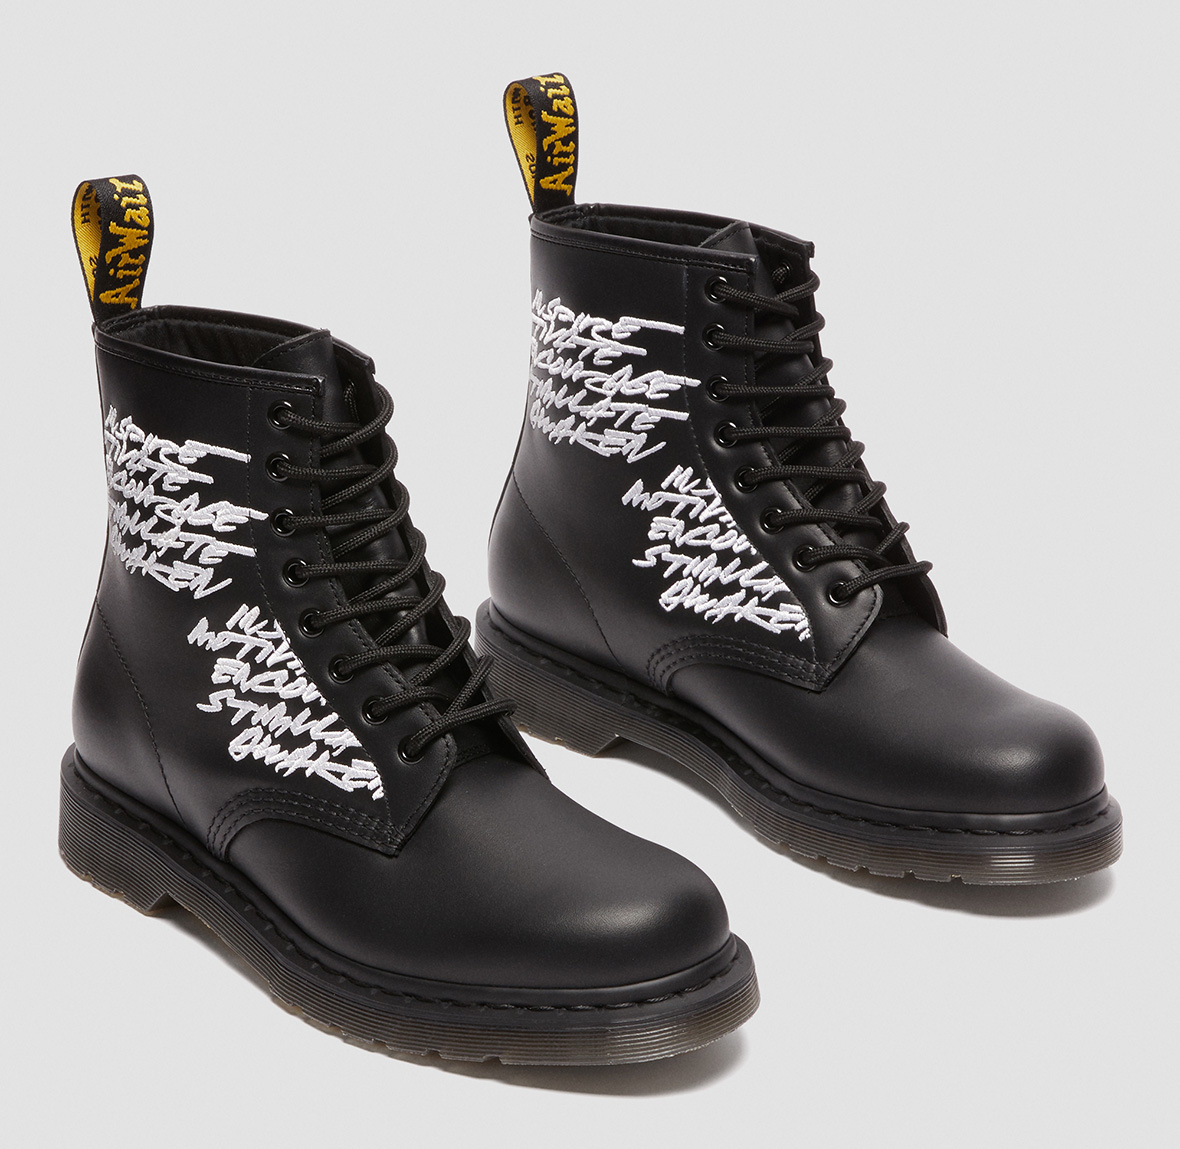 FUTURA LABORATORIES Makes a Mark Upon Dr. Martens Iconic 1460 Boots